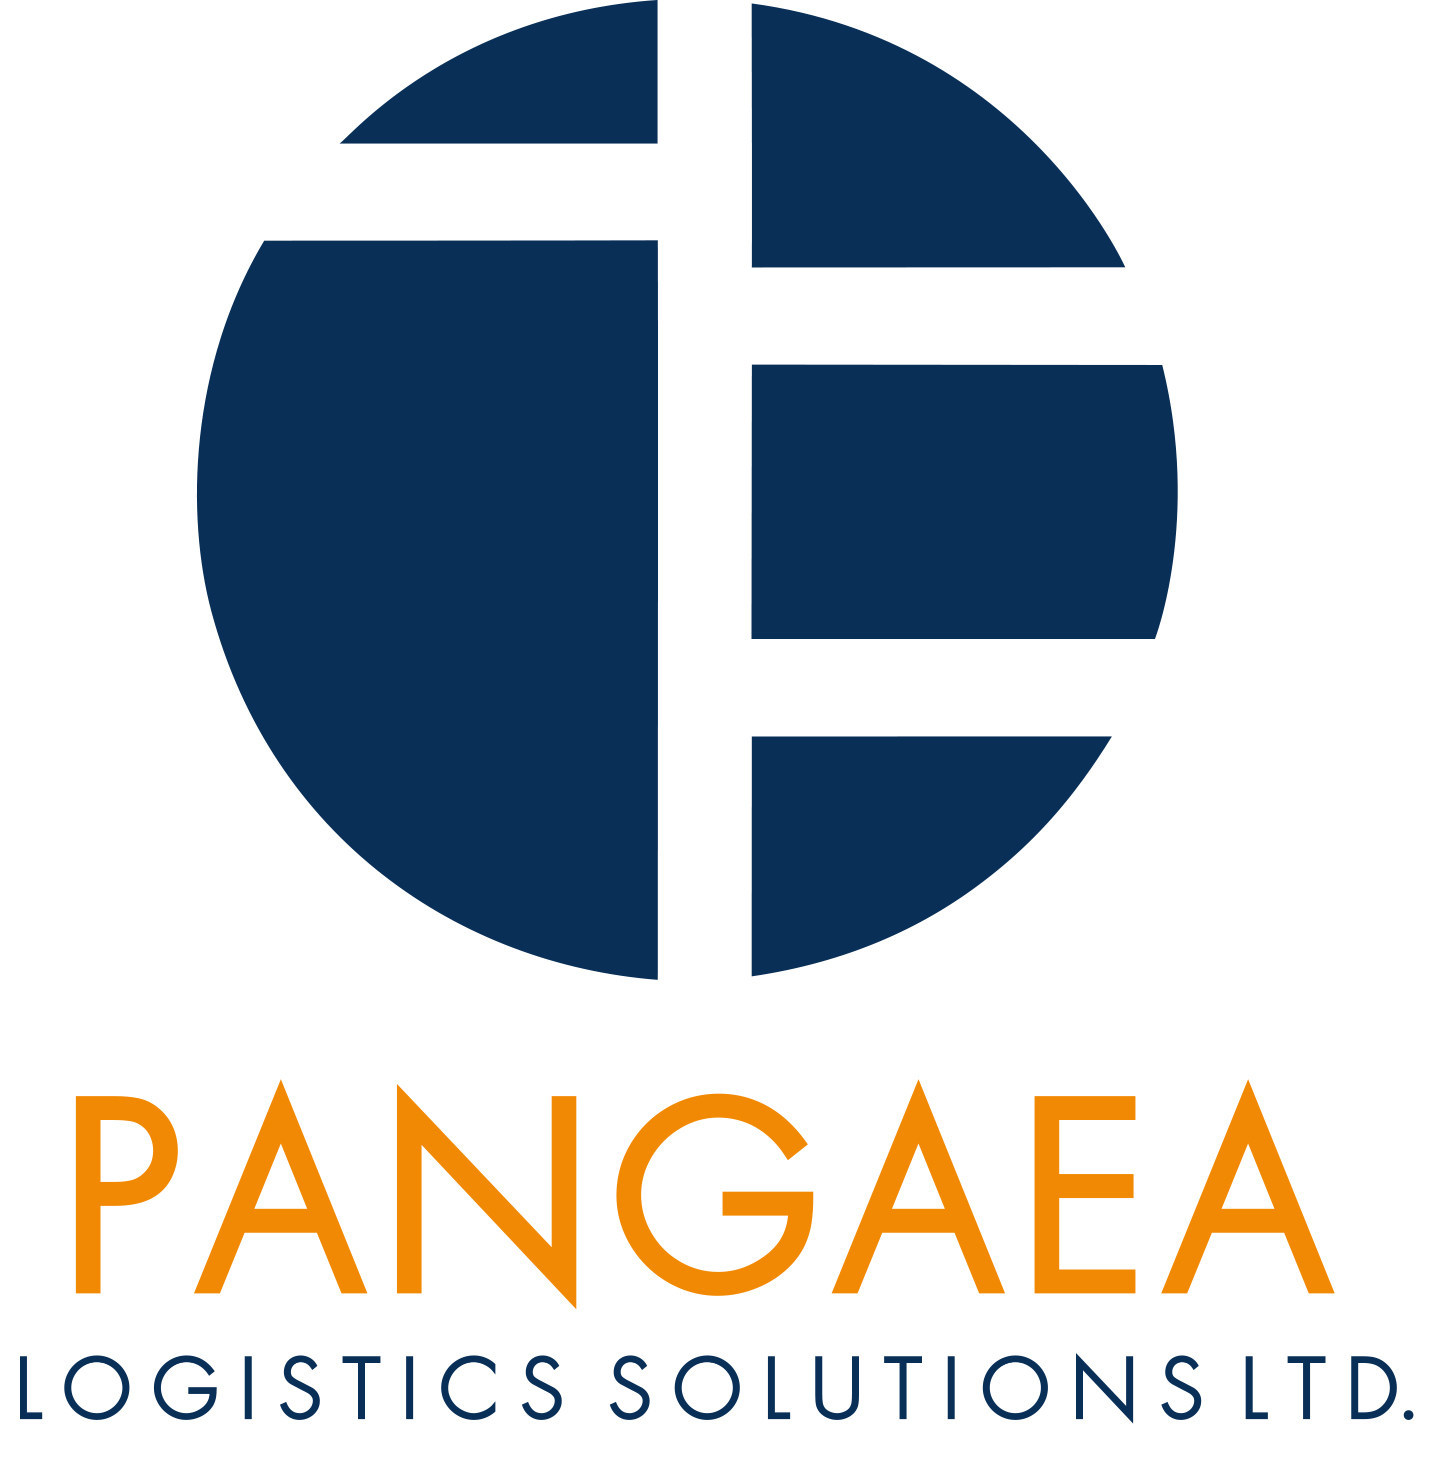 Pangaea Logistics Solutions Ltd. Reports Financial Results for the Three Months and Year Ended December 31, 2018